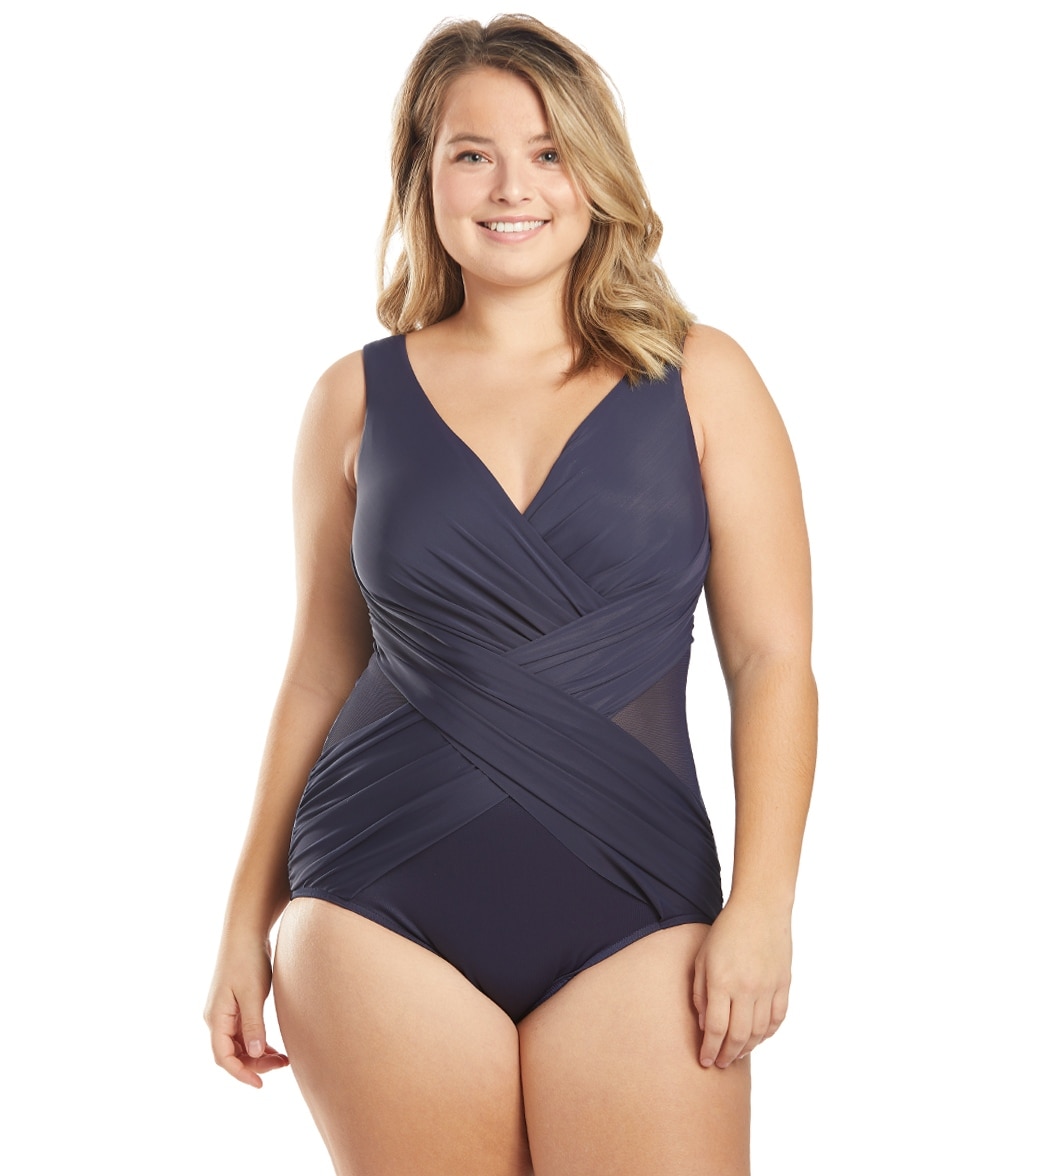 Miraclesuit Plus Size Solid Crossover One Piece Swimsuit - Midnight 16W - Swimoutlet.com